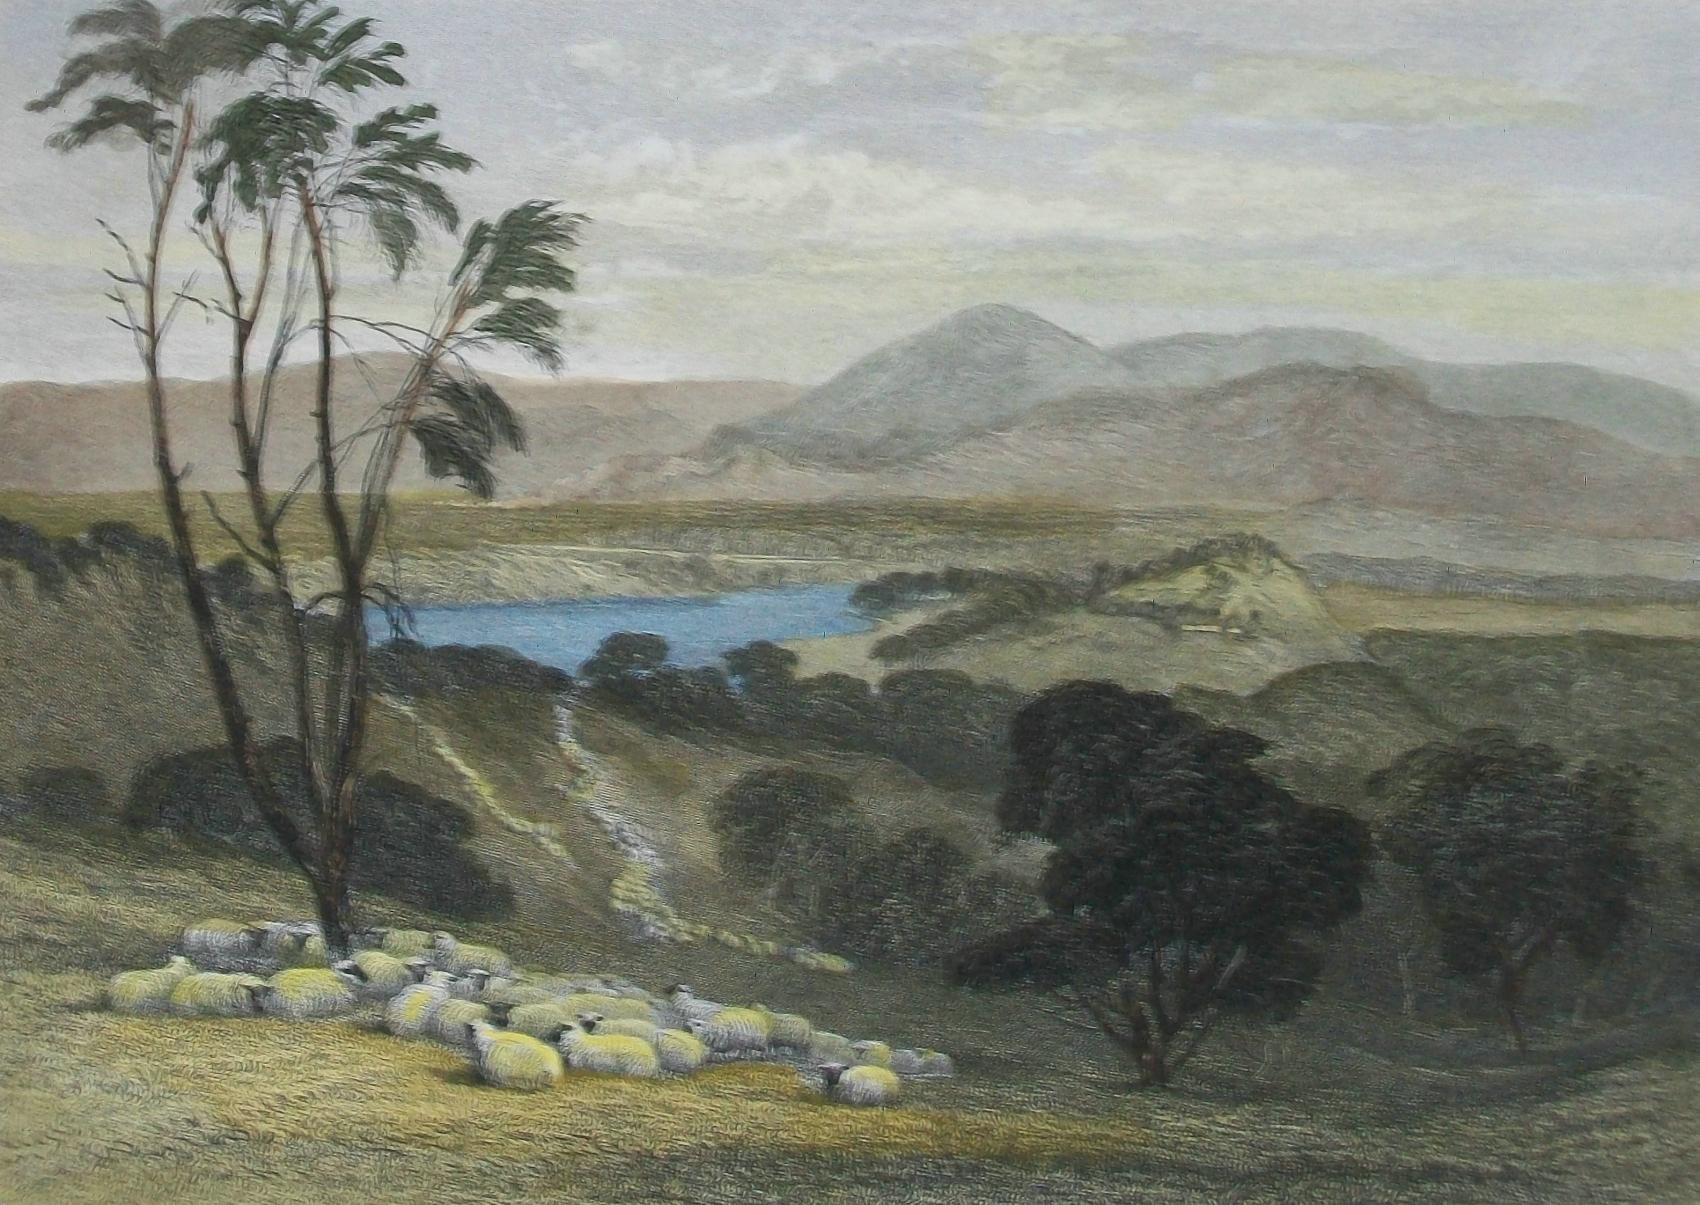 John Skinner Prout (1805-1876) - 'the upper Goulburn, Victoria' - antique steel plate engraving after a painting by J. S. Prout - from 'Australia' by Edwin Carton Booth - hand colored - engraved by William Forrest - titled lower center - signed